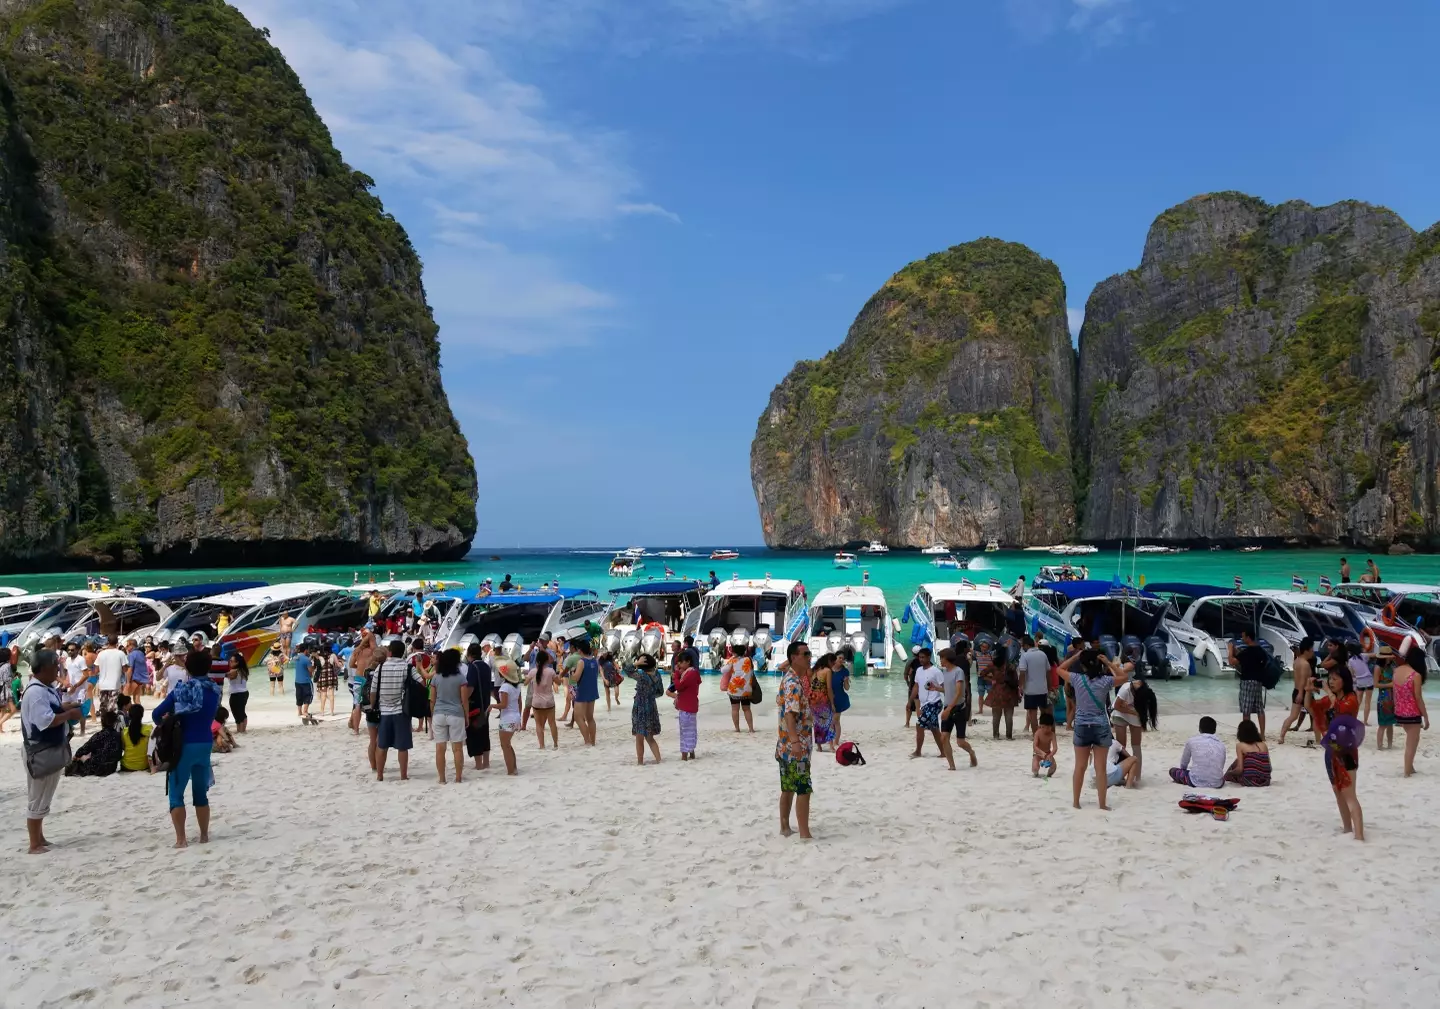 Maya Bay became so popular that it had to be closed in 2018.